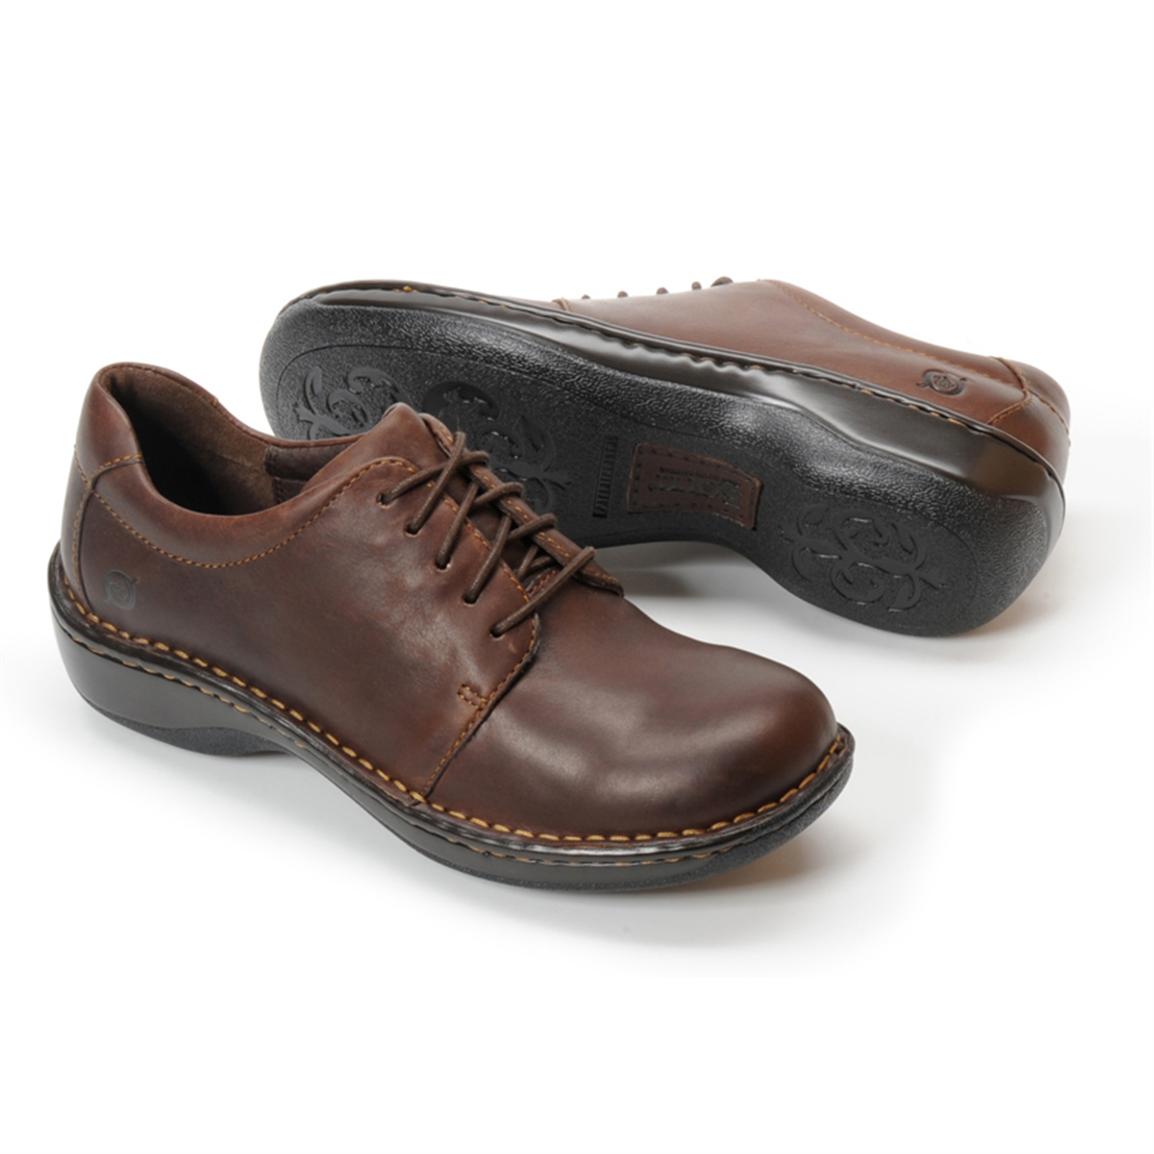 Women's Born® Cathay Shoes - 195178, Casual Shoes at Sportsman's Guide